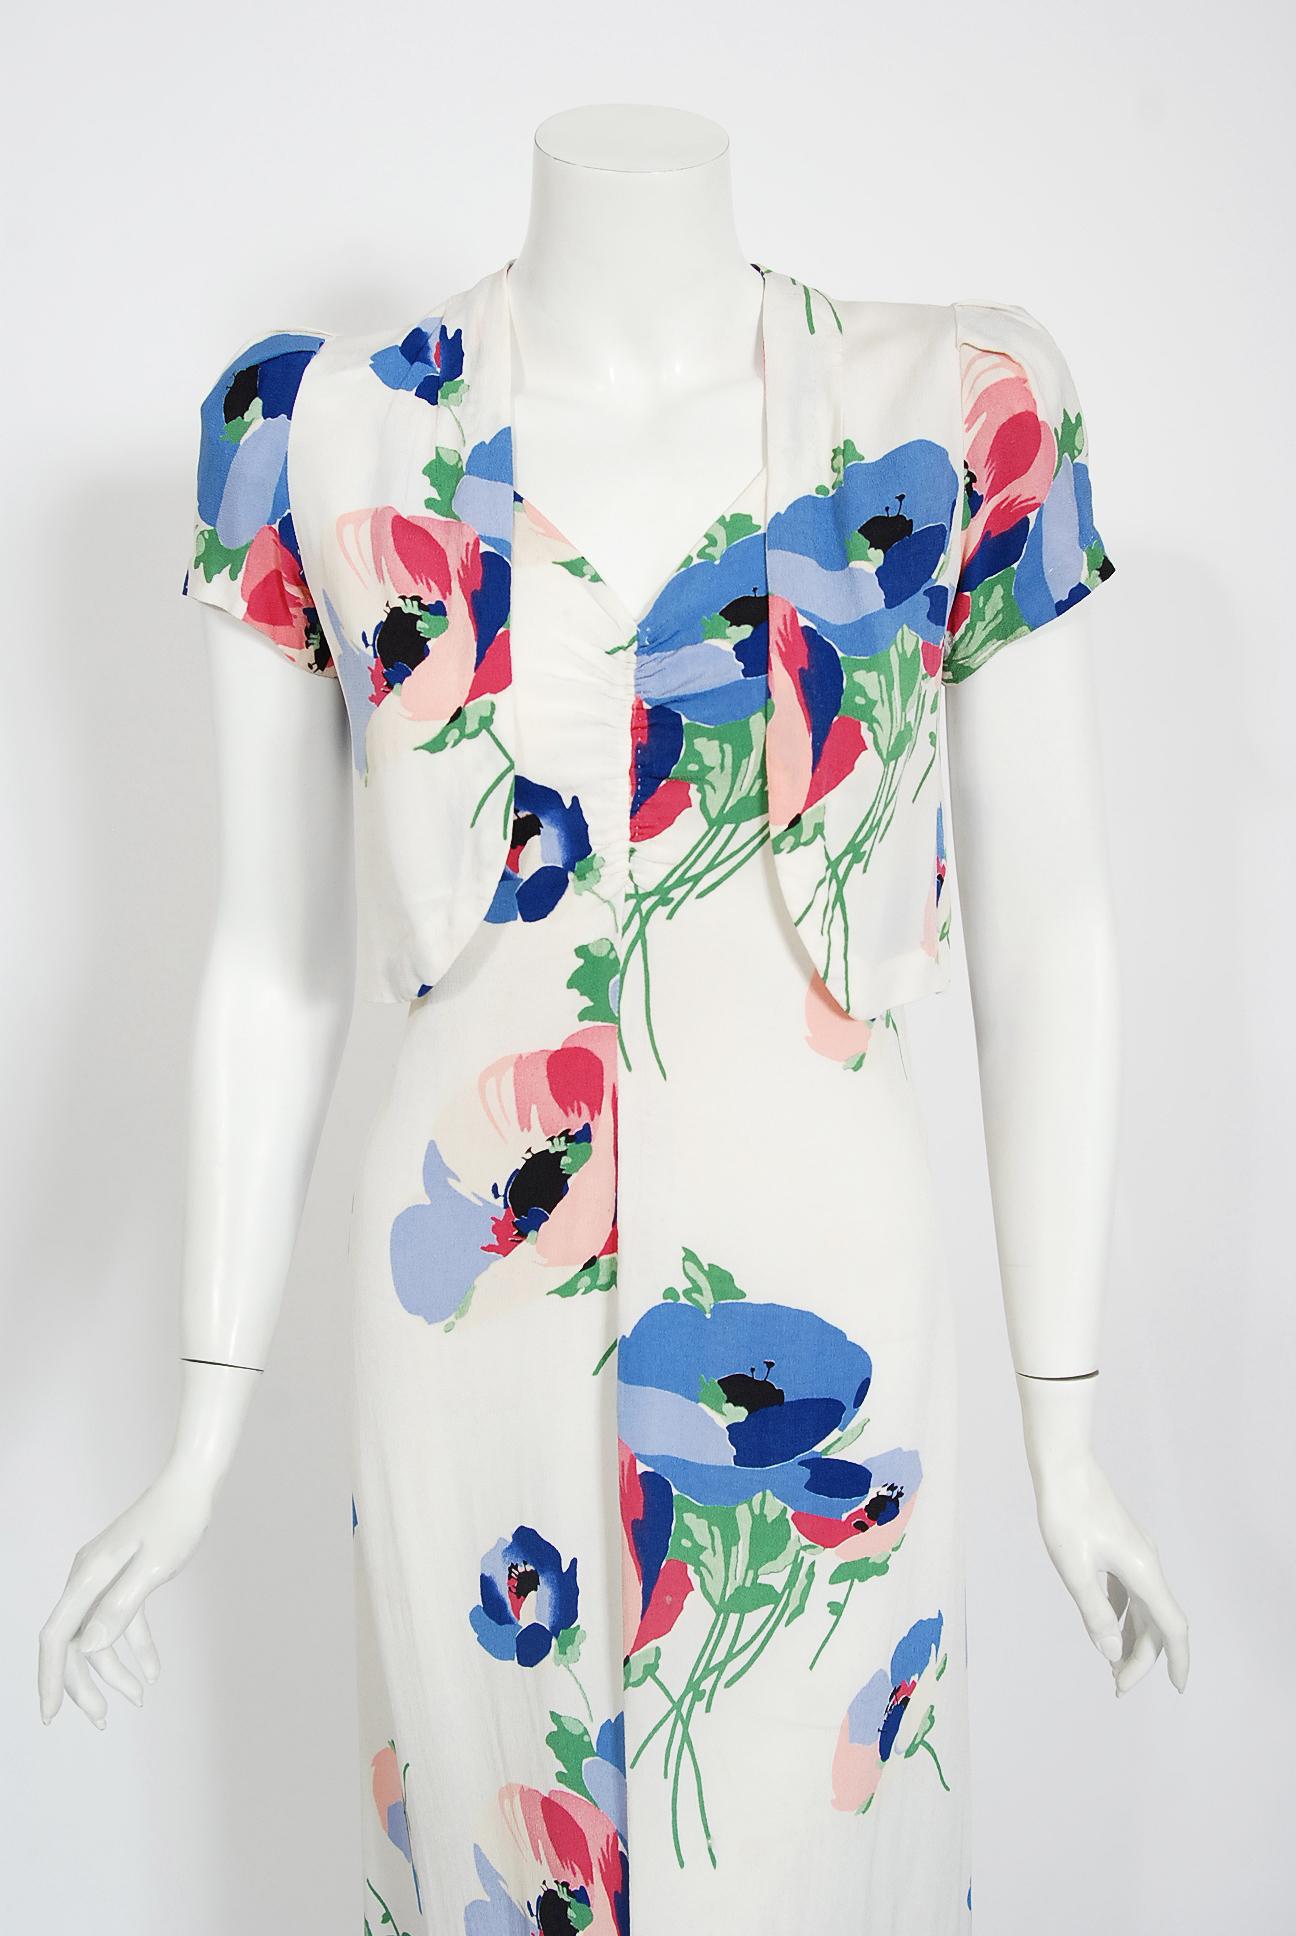 There are lots of lovely 1930's garments still around, but every once in a while I come across one that sets my heart a flutter! This is a simply beautiful 1930's summertime colorful floral white rayon-crepe dress ensemble. The over-sized poppy